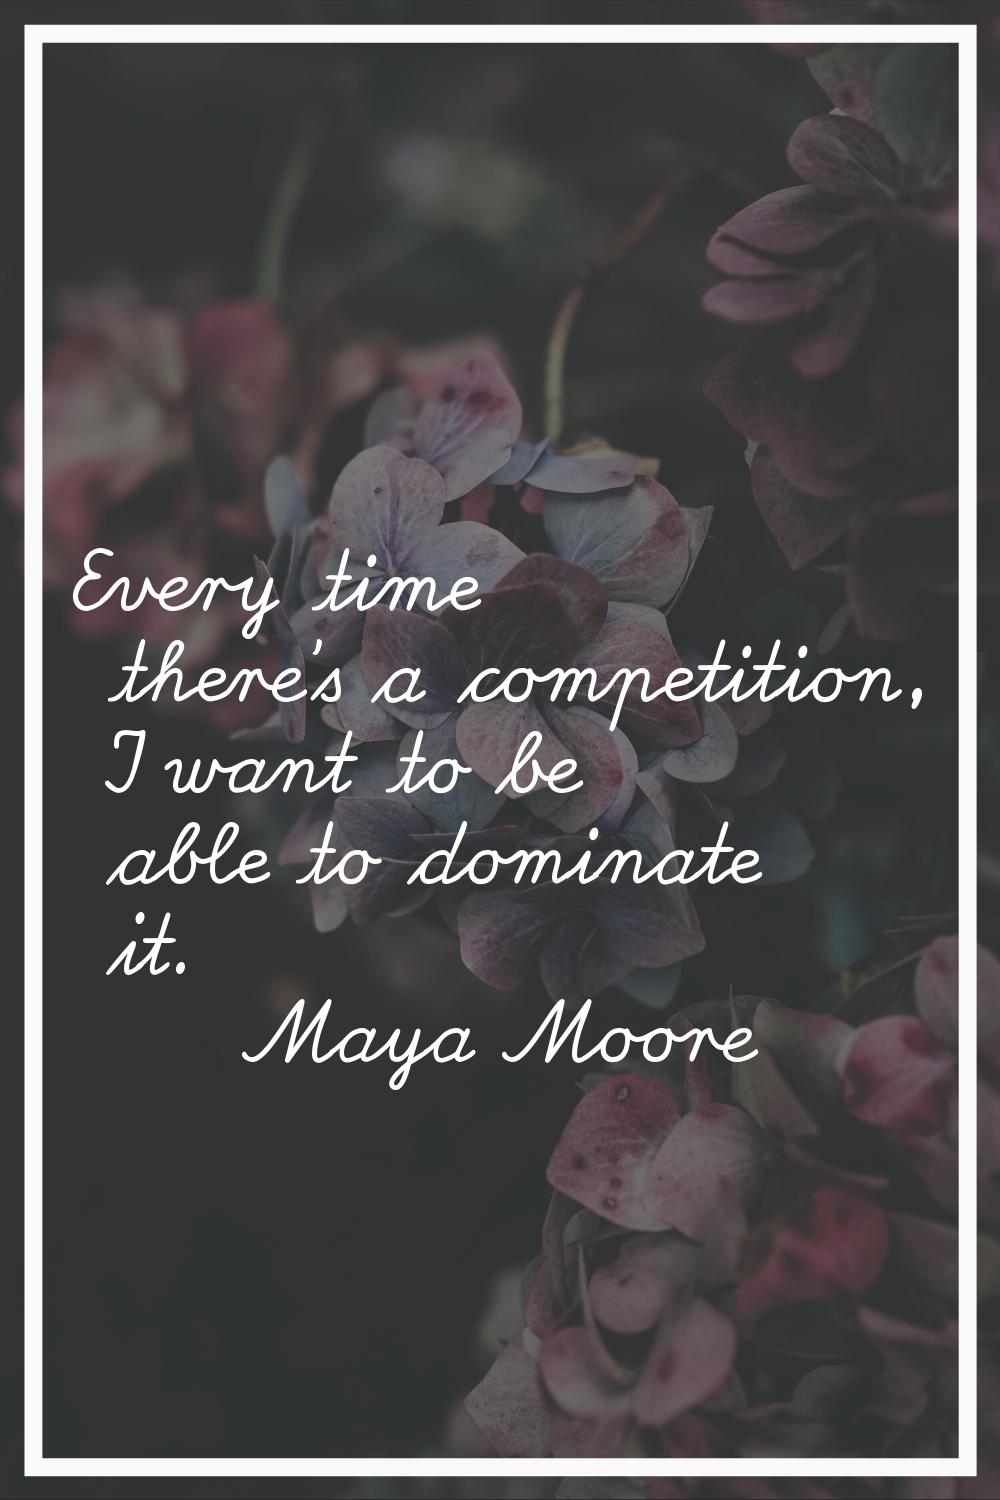 Every time there's a competition, I want to be able to dominate it.